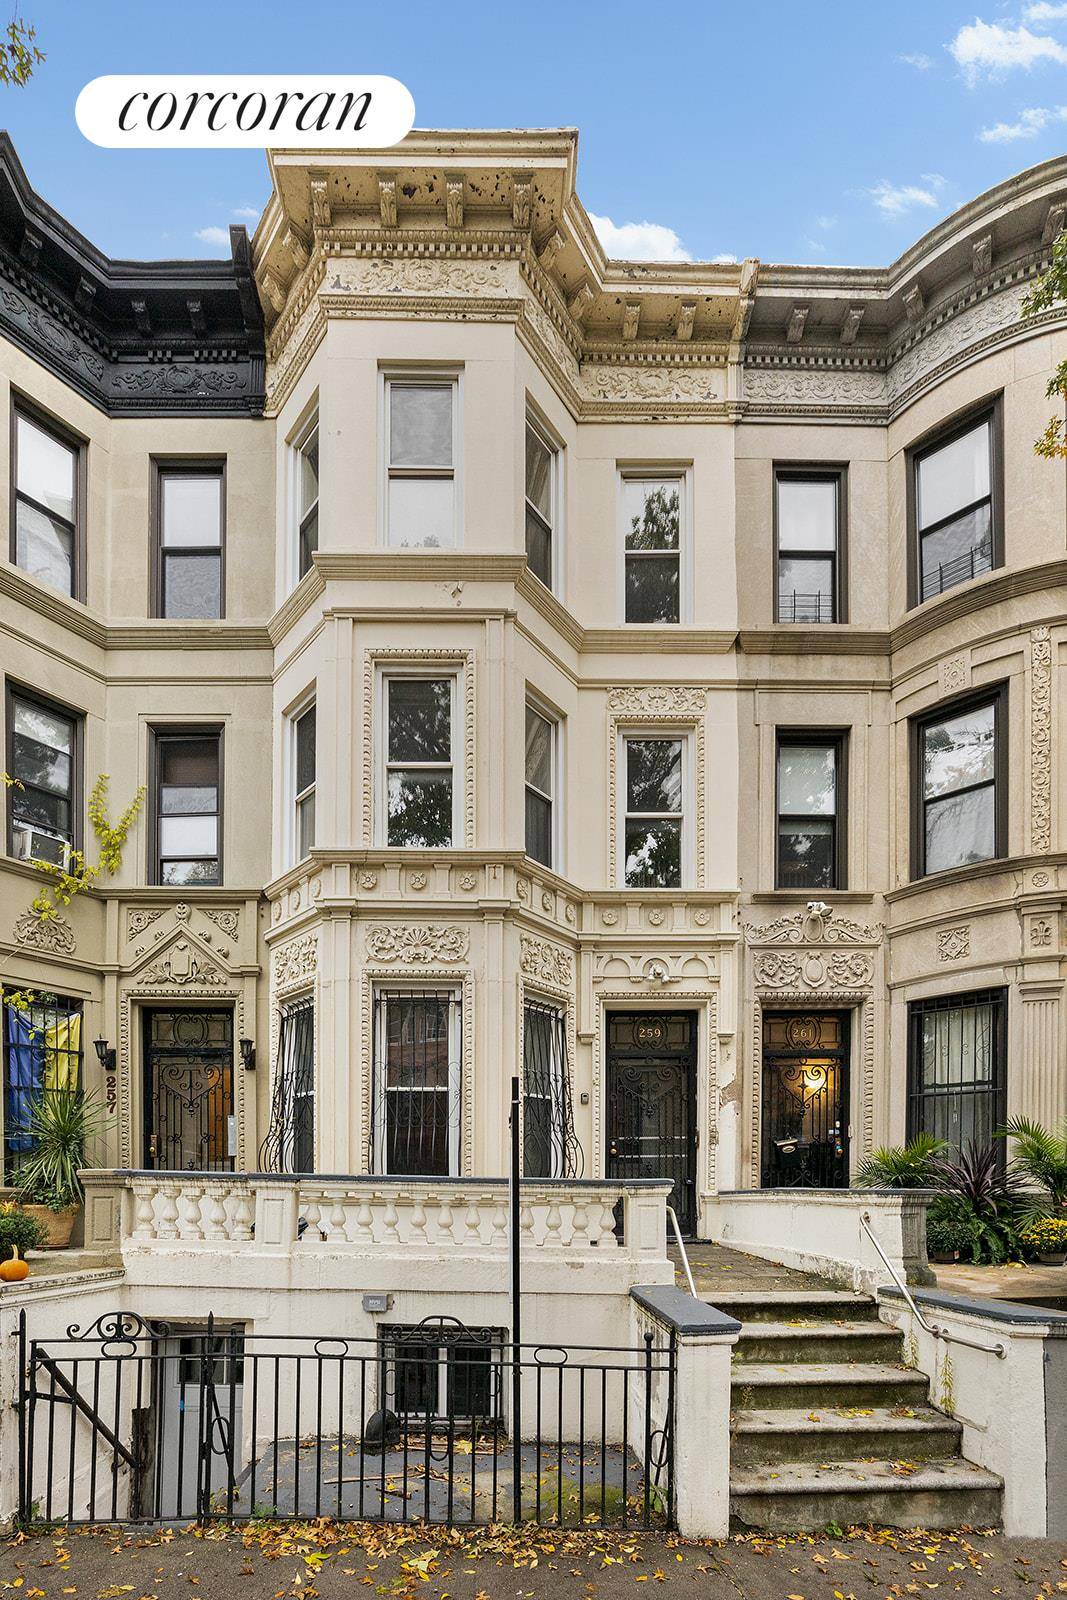 Welcome to 259 New York Avenue, an expansive landmarked limestone offering unlimited potential.